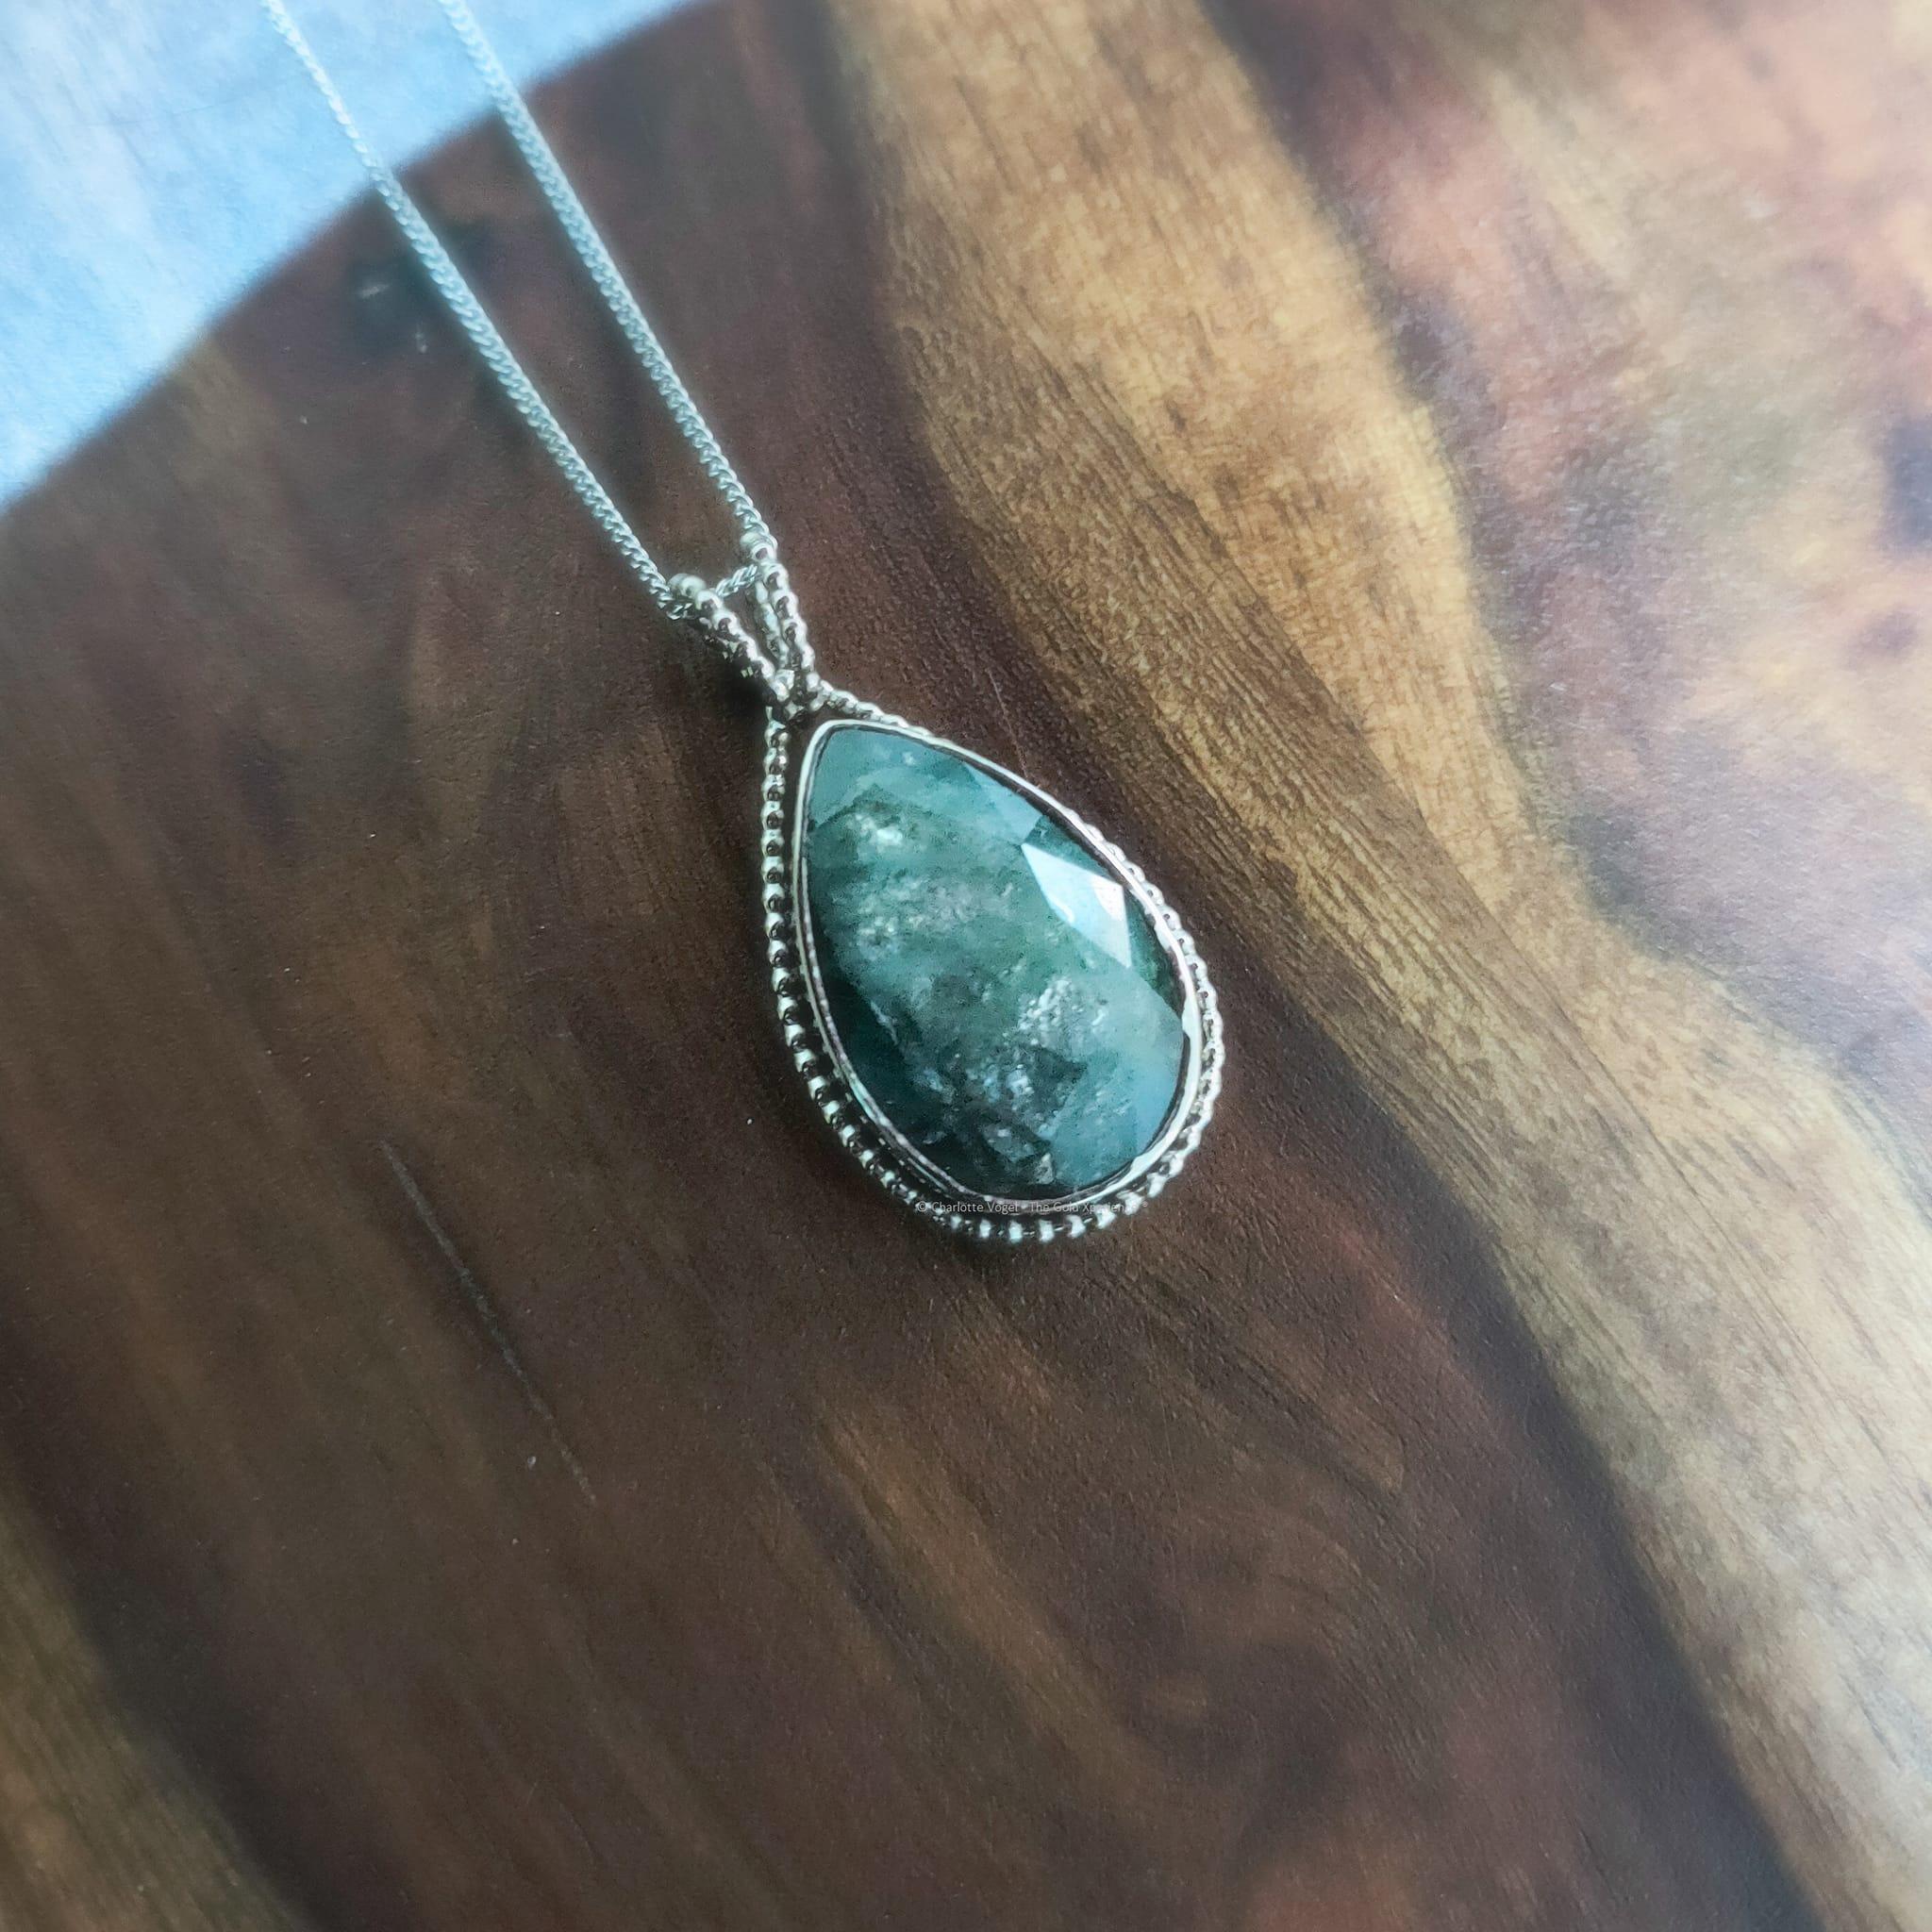 [Specs below...]

Necklace with white gold pendant emerald

This white gold pendant with a huge teardrop emerald stands out because of the sparkle in the stone. It looks like there are flakes of white gold ín the emerald from as well! The stone,